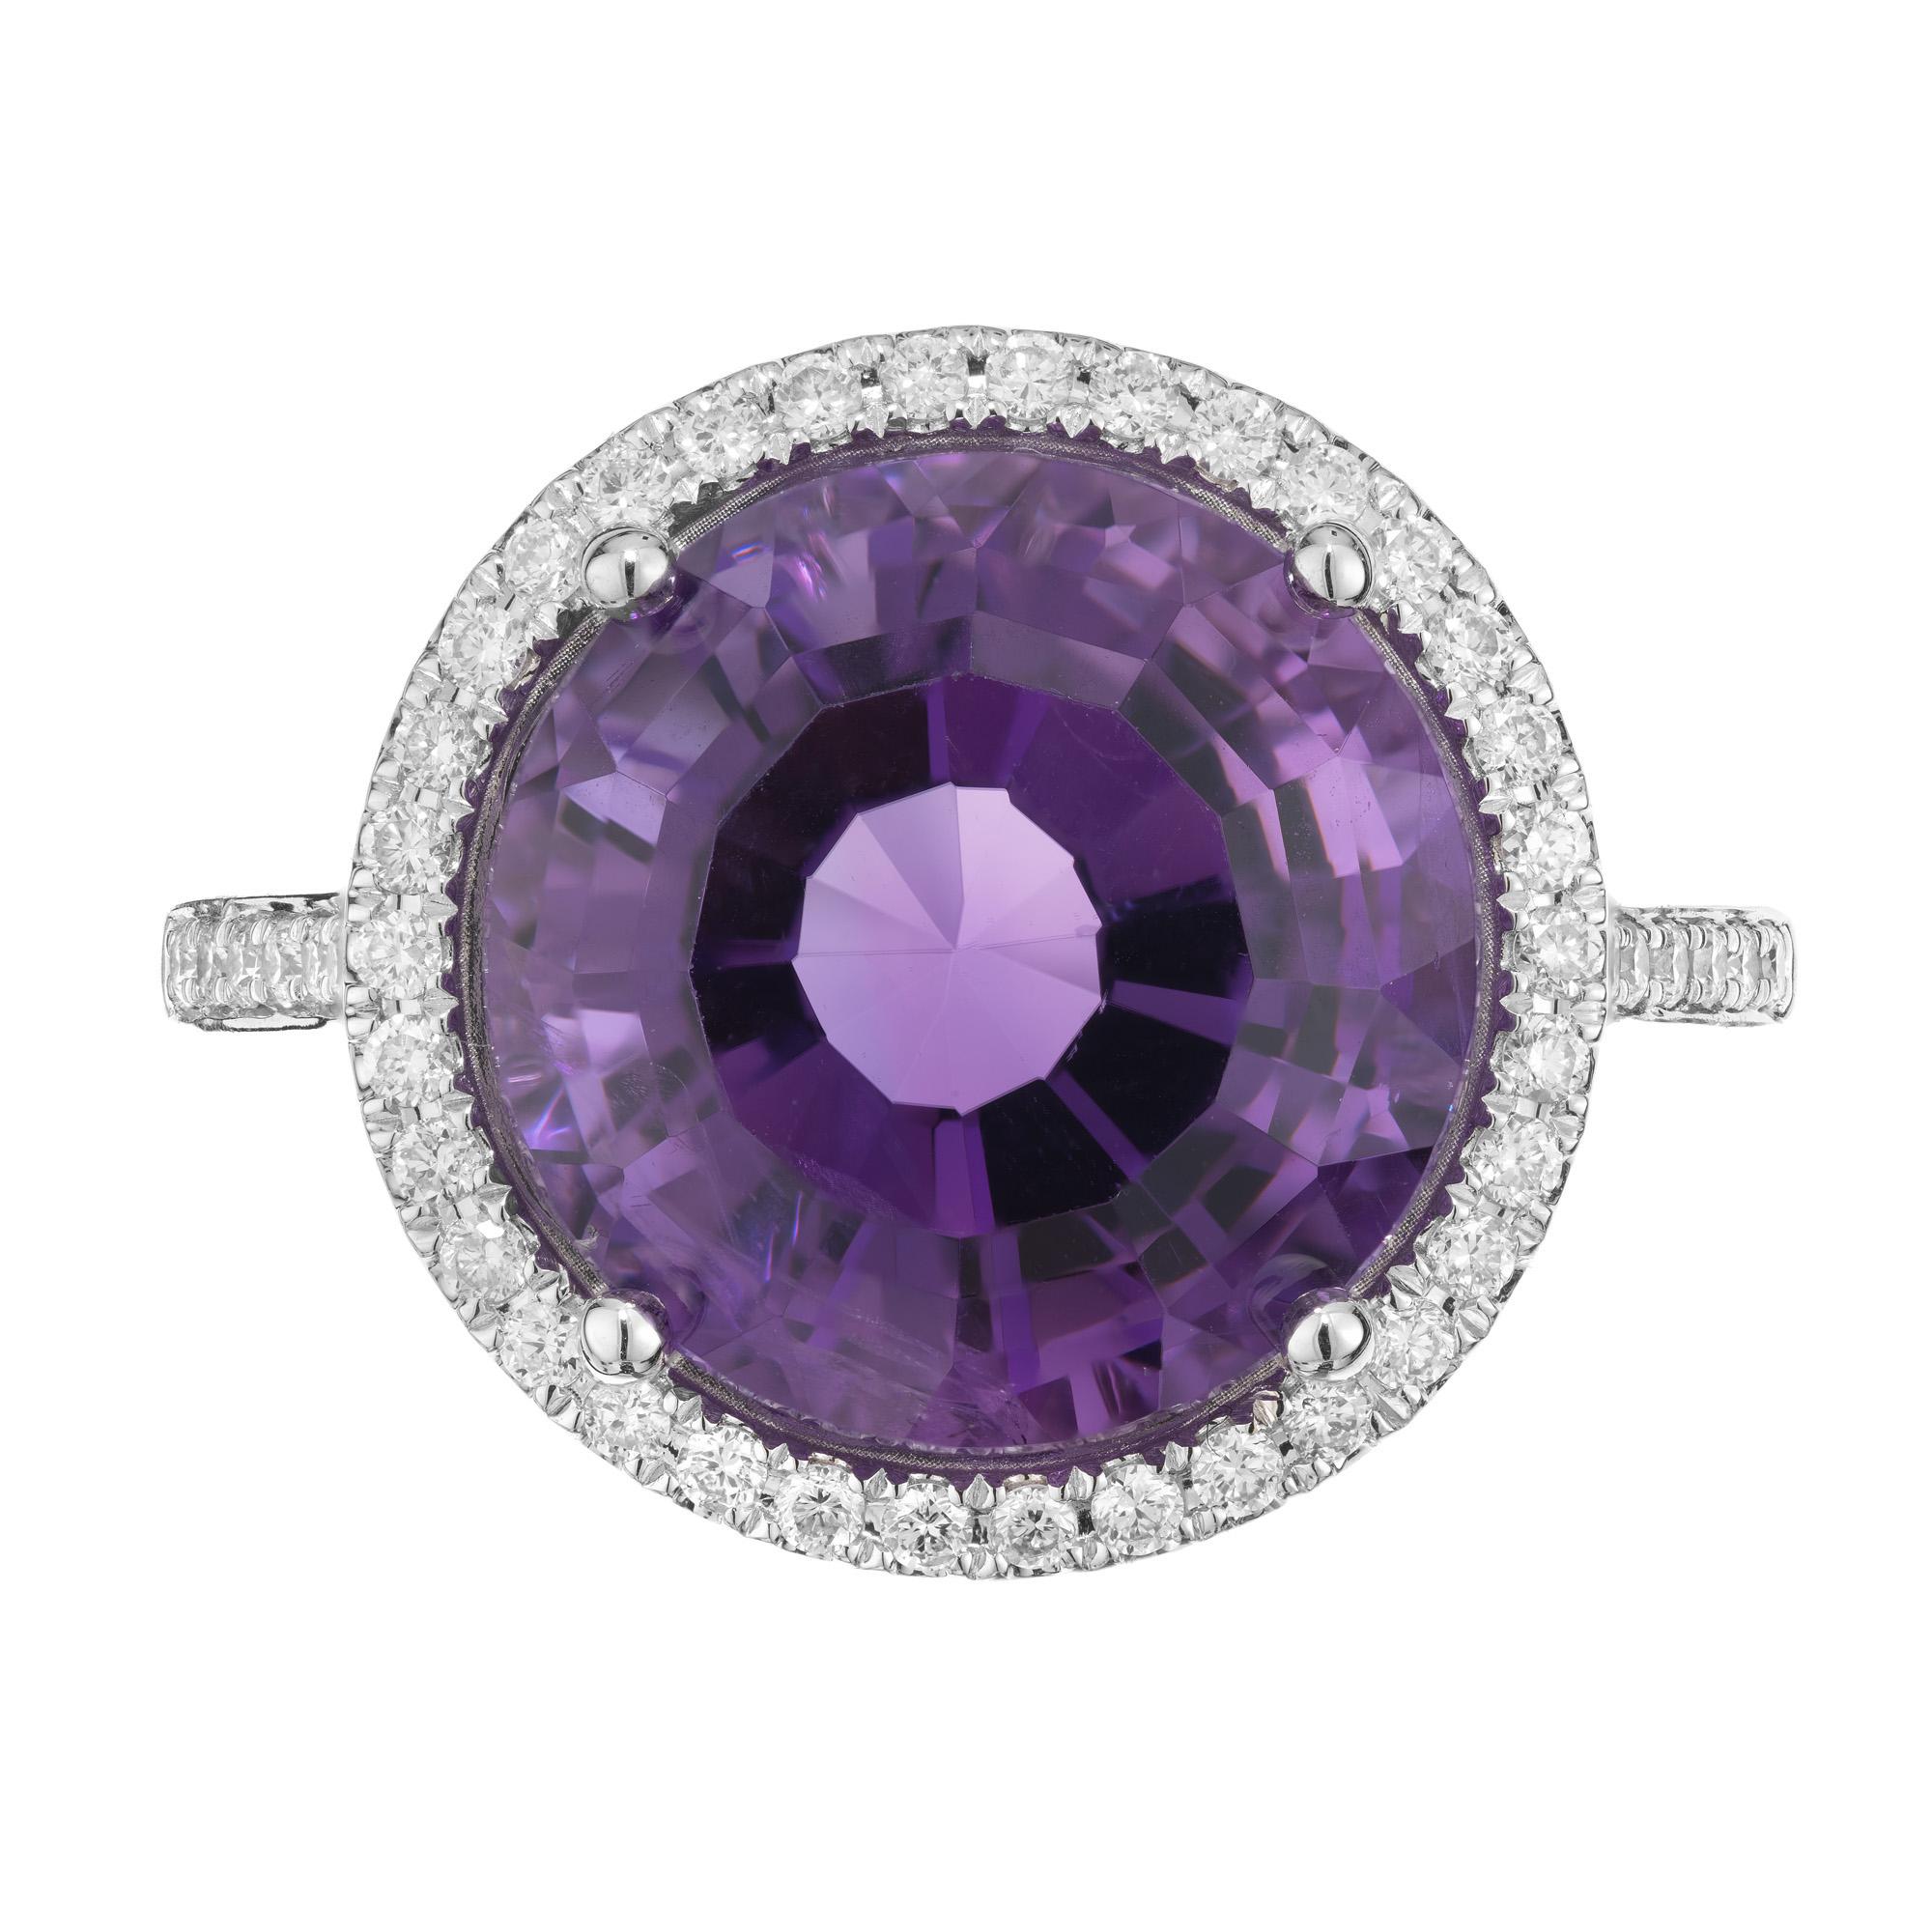 Indulge in elegance with our Amethyst and Diamond cocktail ring. This exquisite piece features a stunning 6.45ct round amethyst center stone mounted in a 14k white gold setting. The Amethyst is accented by a halo of round brilliant cut sparkling